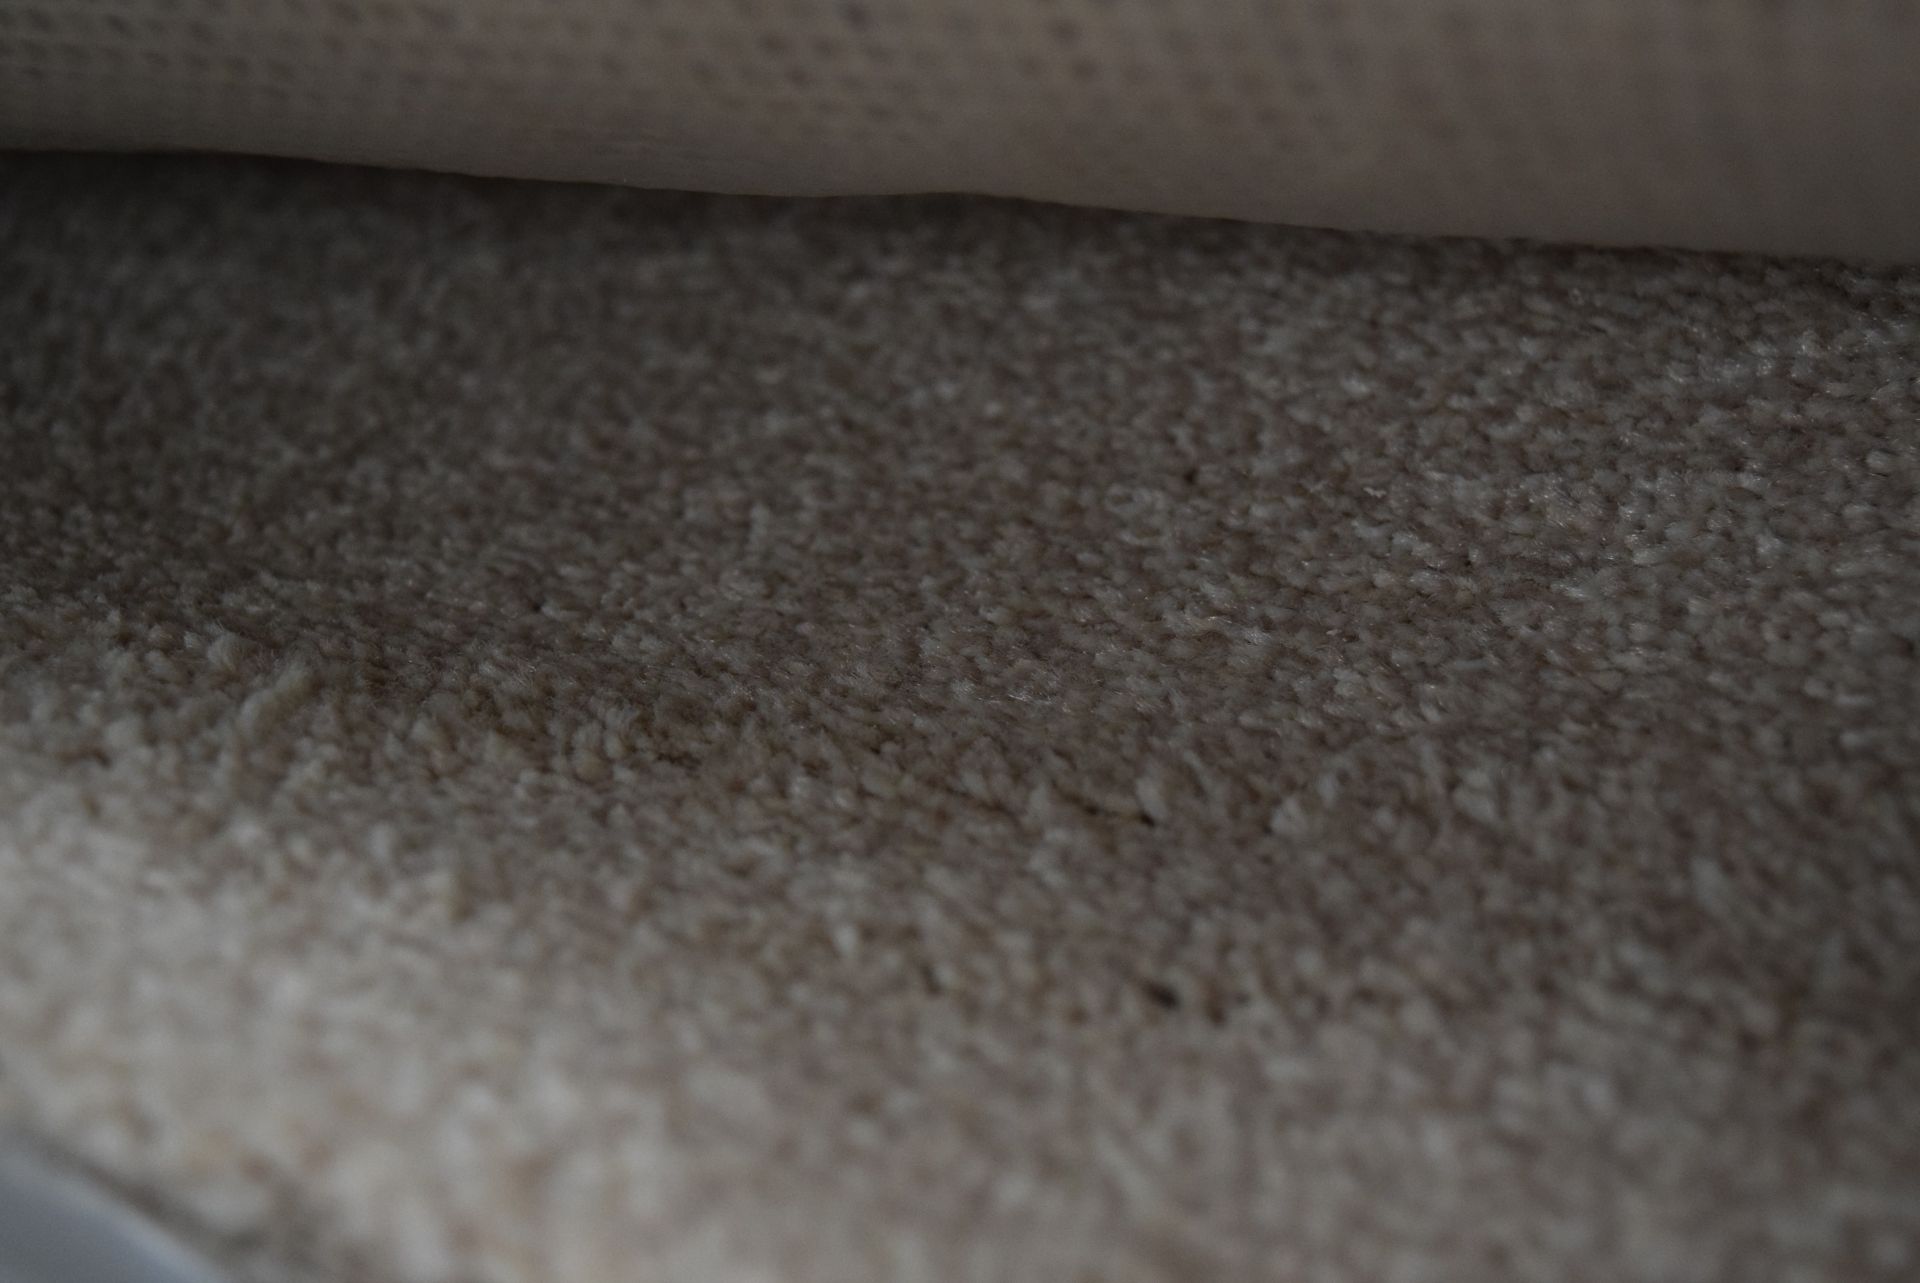 1 X ROLL OF EMPEROR CARPET 5X1.89M COVERS 9.45SQM RRP £160 969091